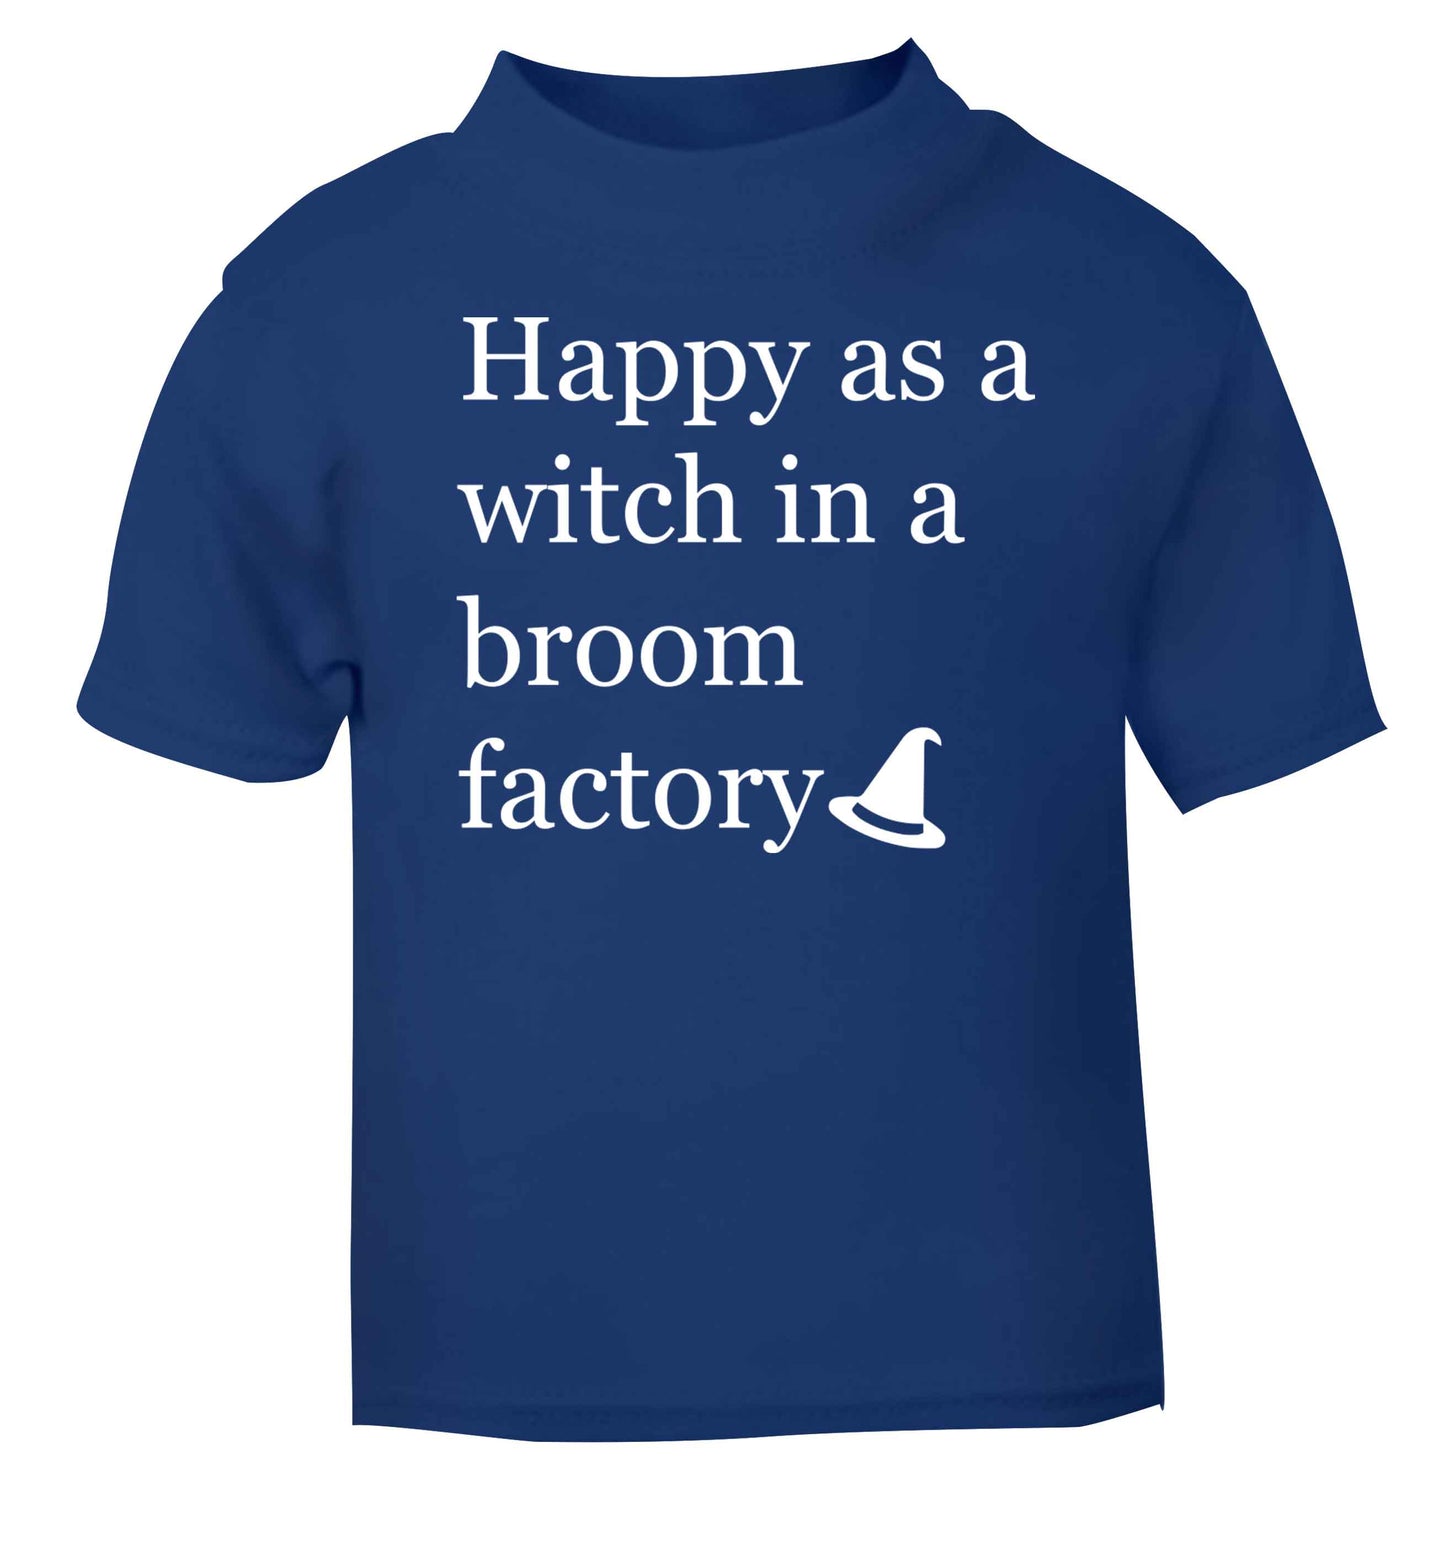 Happy as a witch in a broom factory blue baby toddler Tshirt 2 Years